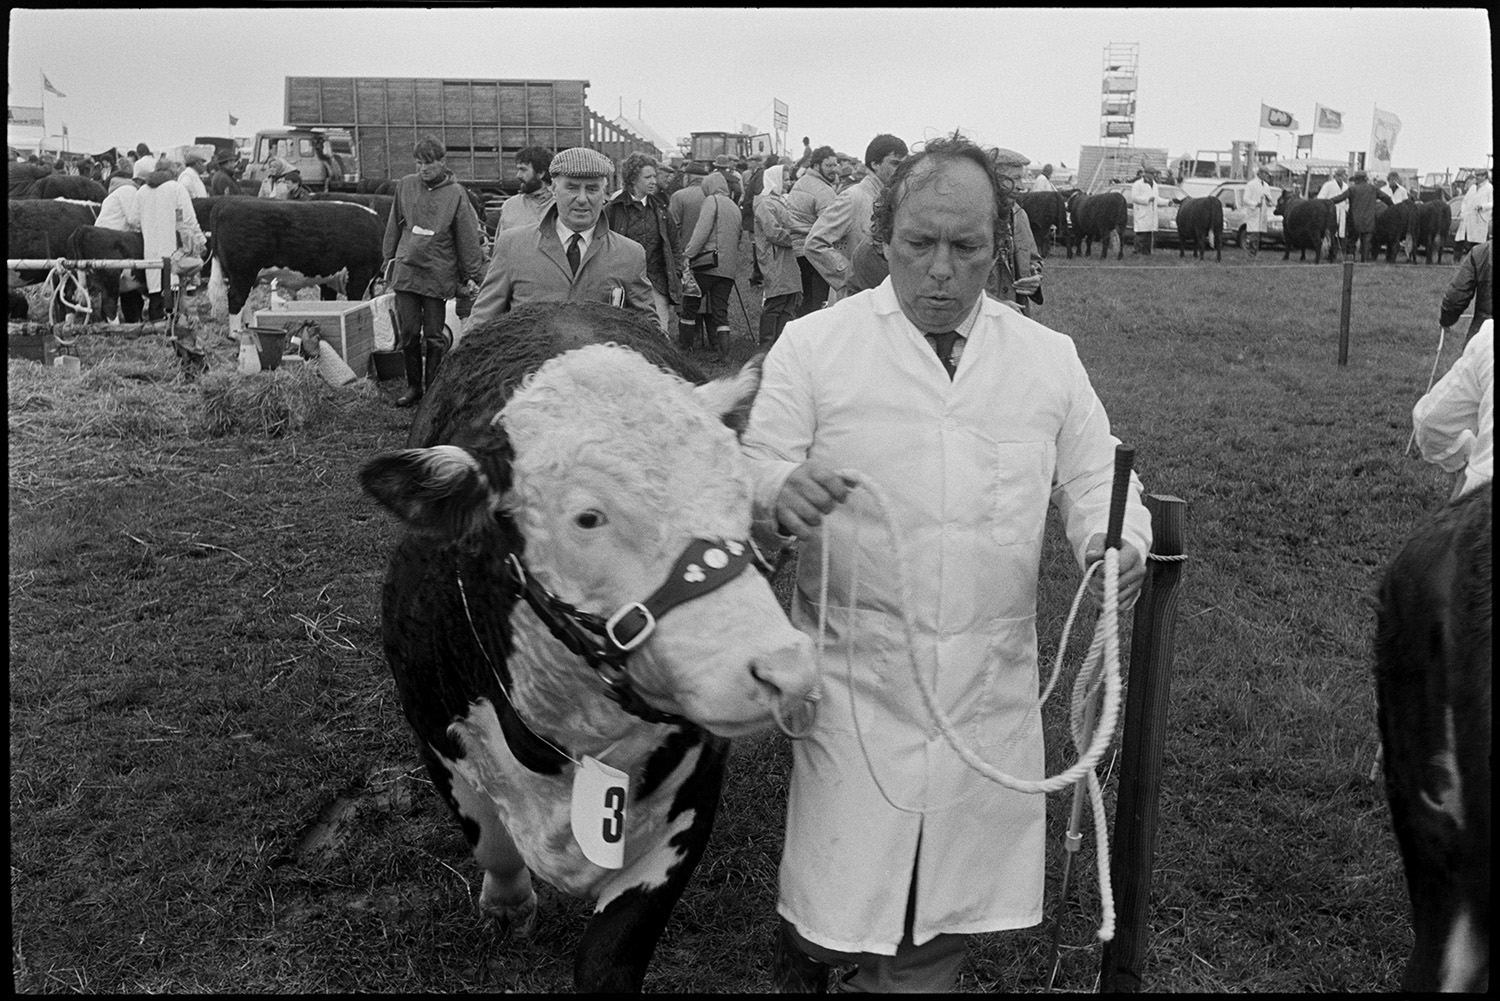 North Devon Show, prize bulls and cattle. 
[A man wearing a white coat and leading a bull at the North Devon Show. Other cattle can be seen in the background, as well as livestock trailers and visitors to the show.]